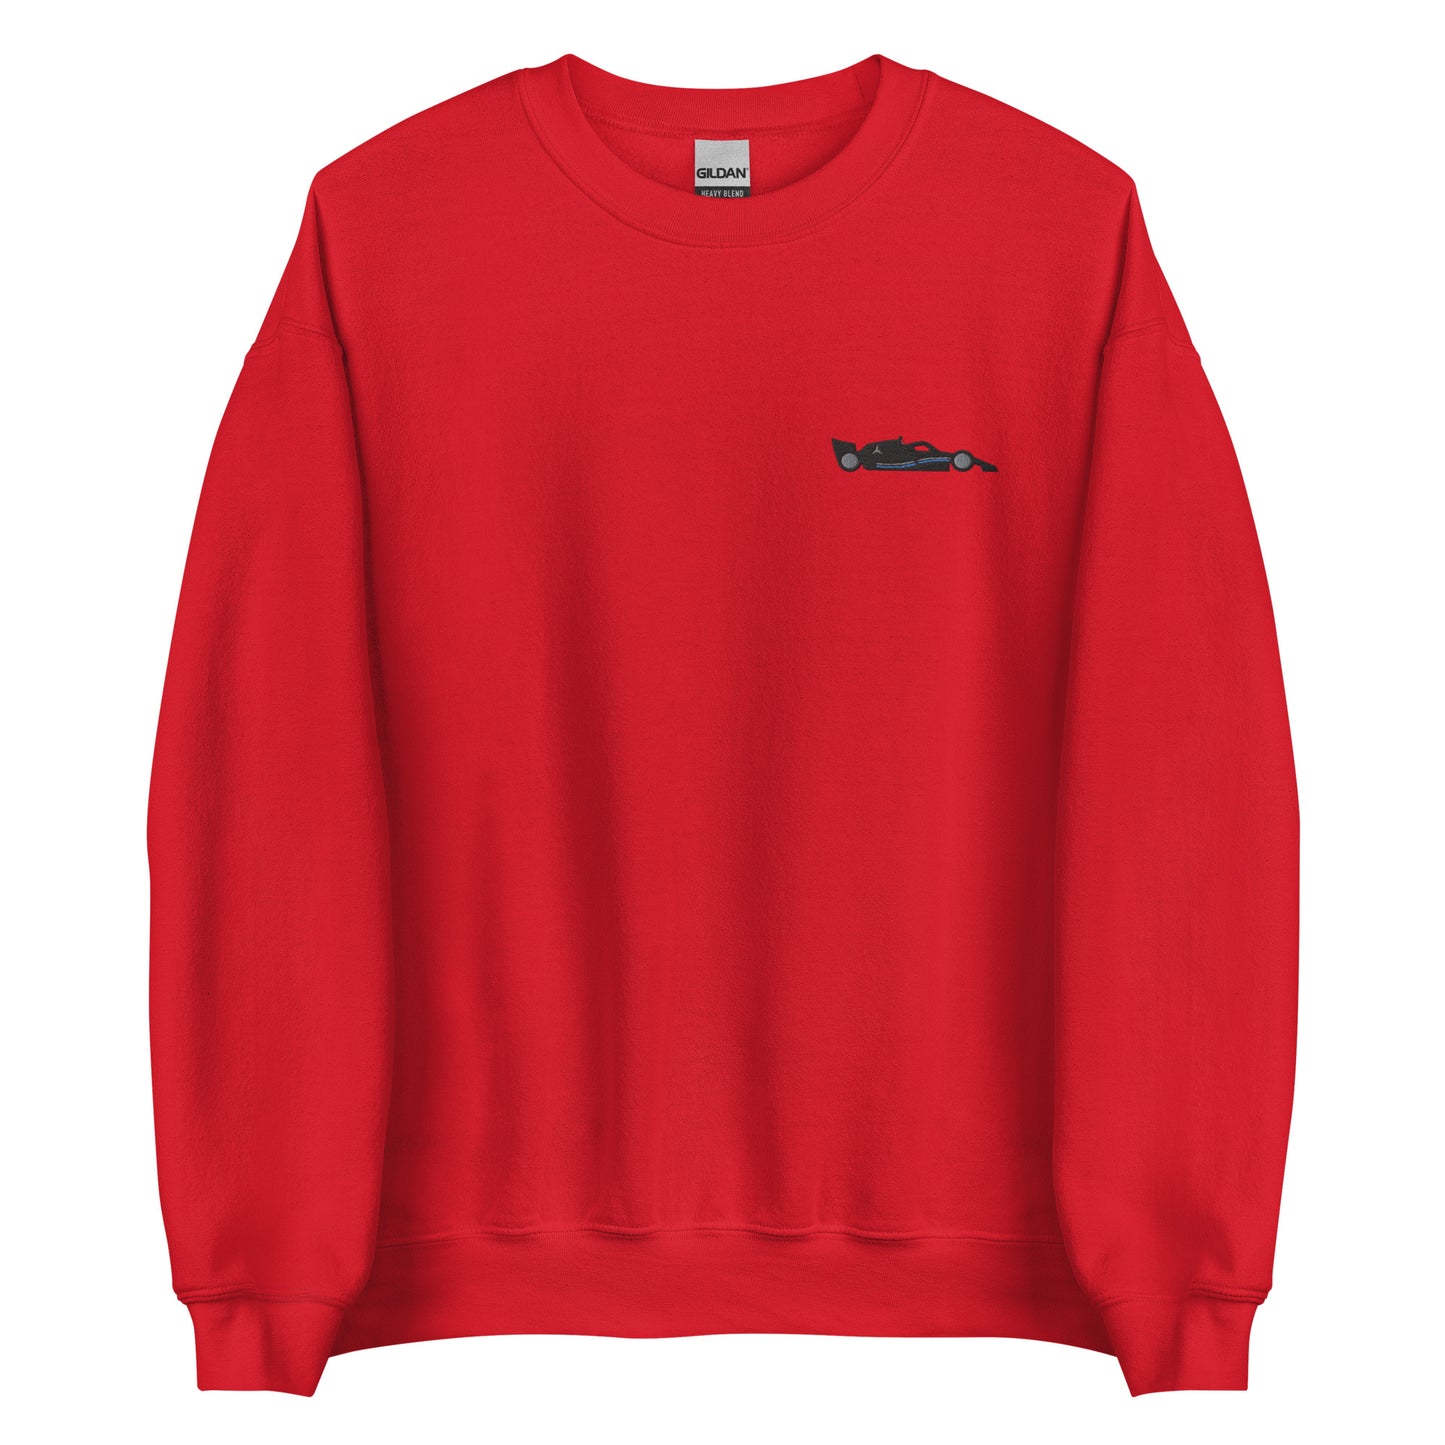 Embroidered Mercedes F1 Car Sweatshirt red